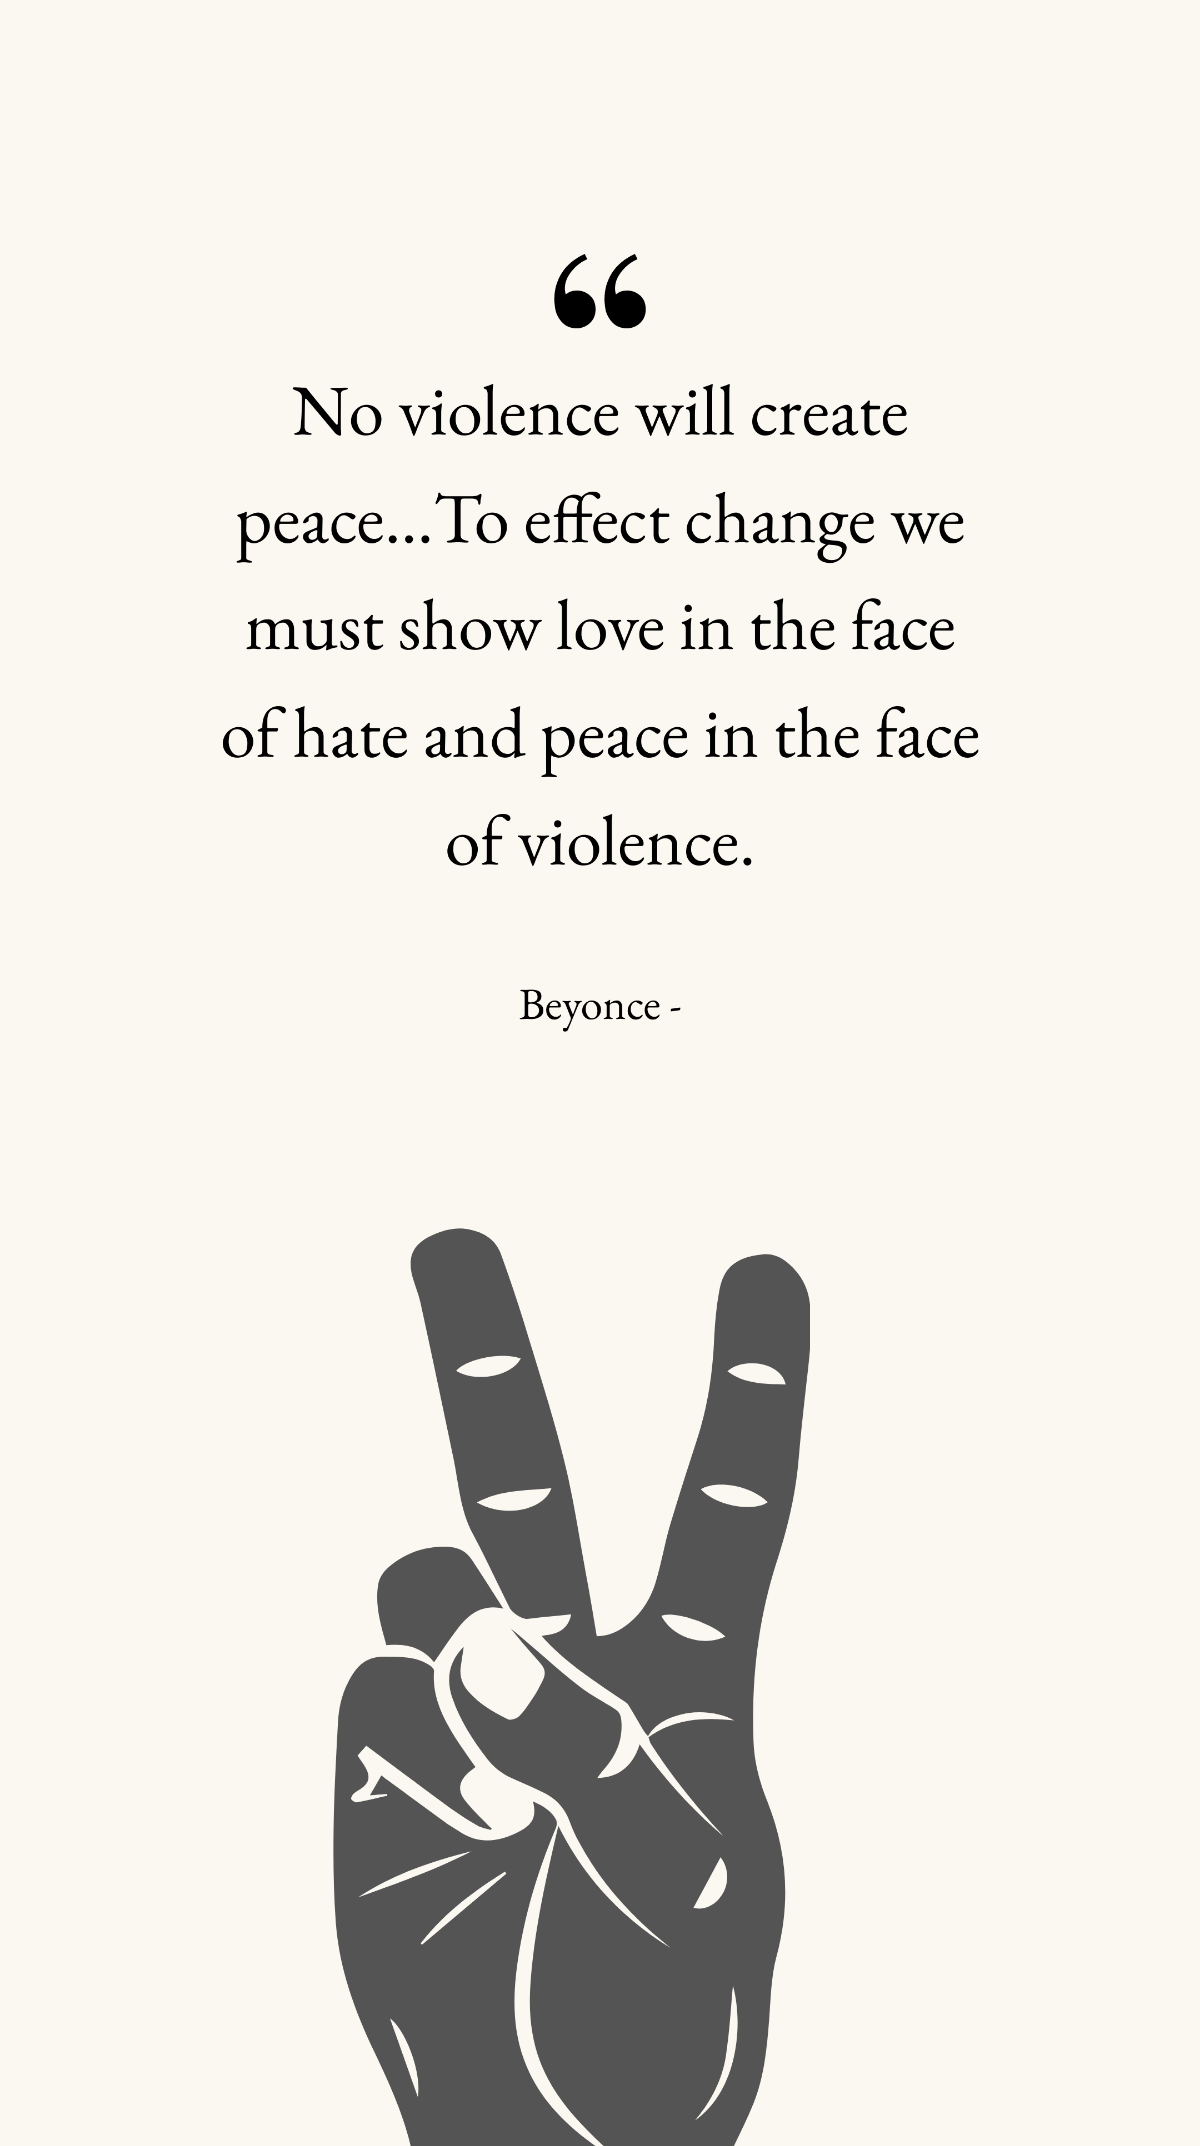 Beyonce - No violence will create peace…To effect change we must show love in the face of hate and peace in the face of violence. Template